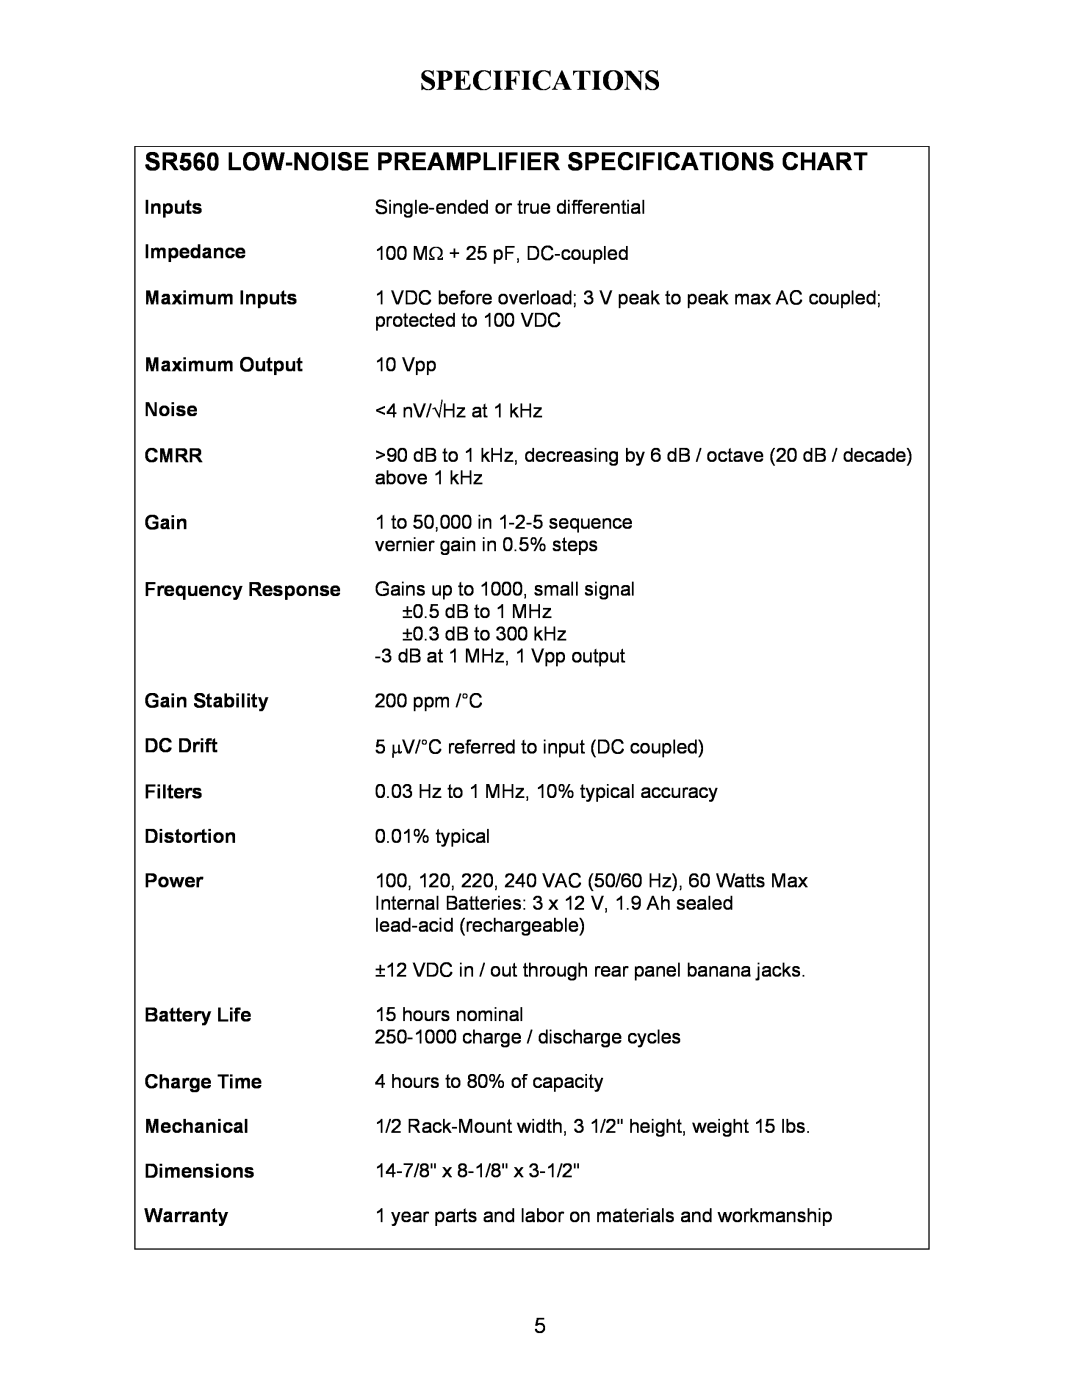 SRS Labs manual Specifications, SR560 LOW-NOISEPREAMPLIFIER SPECIFICATIONS CHART 